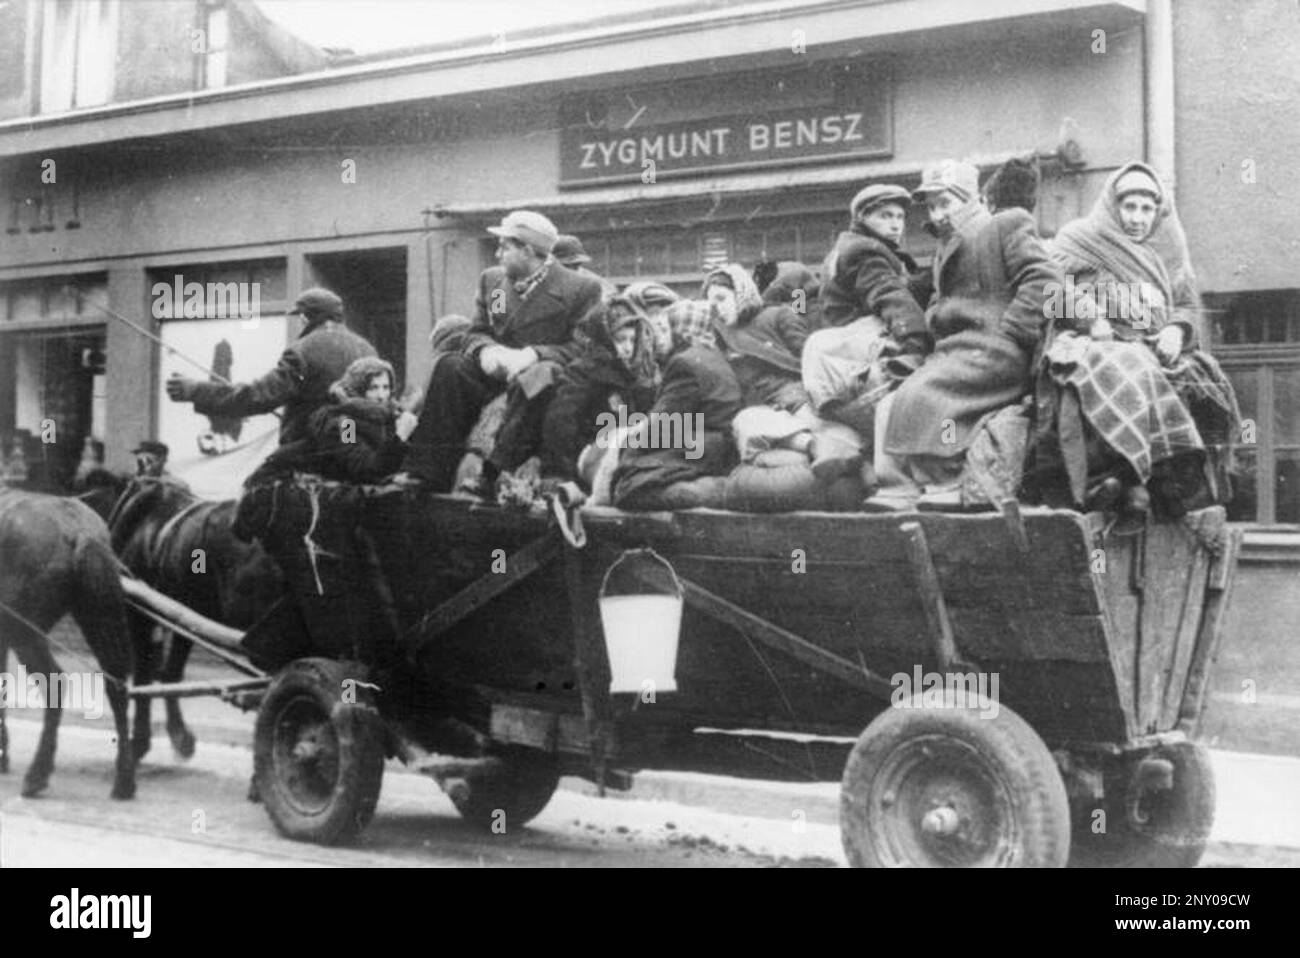 In the early stages of WW2 the Jews in nazi occupied europe were rounded up and forced into crowded ghettoes. When the decision was made to kill them all they were deported to extermination centres to be murdered. This image shows  people , deported from the homes elsewhere, arriving in the Lodz Ghetto. Polen, Ghetto Litzmannstadt, Deportation. Bundesarchiv, Bild 137-056925 / CC-BY-SA 3.0 Stock Photo